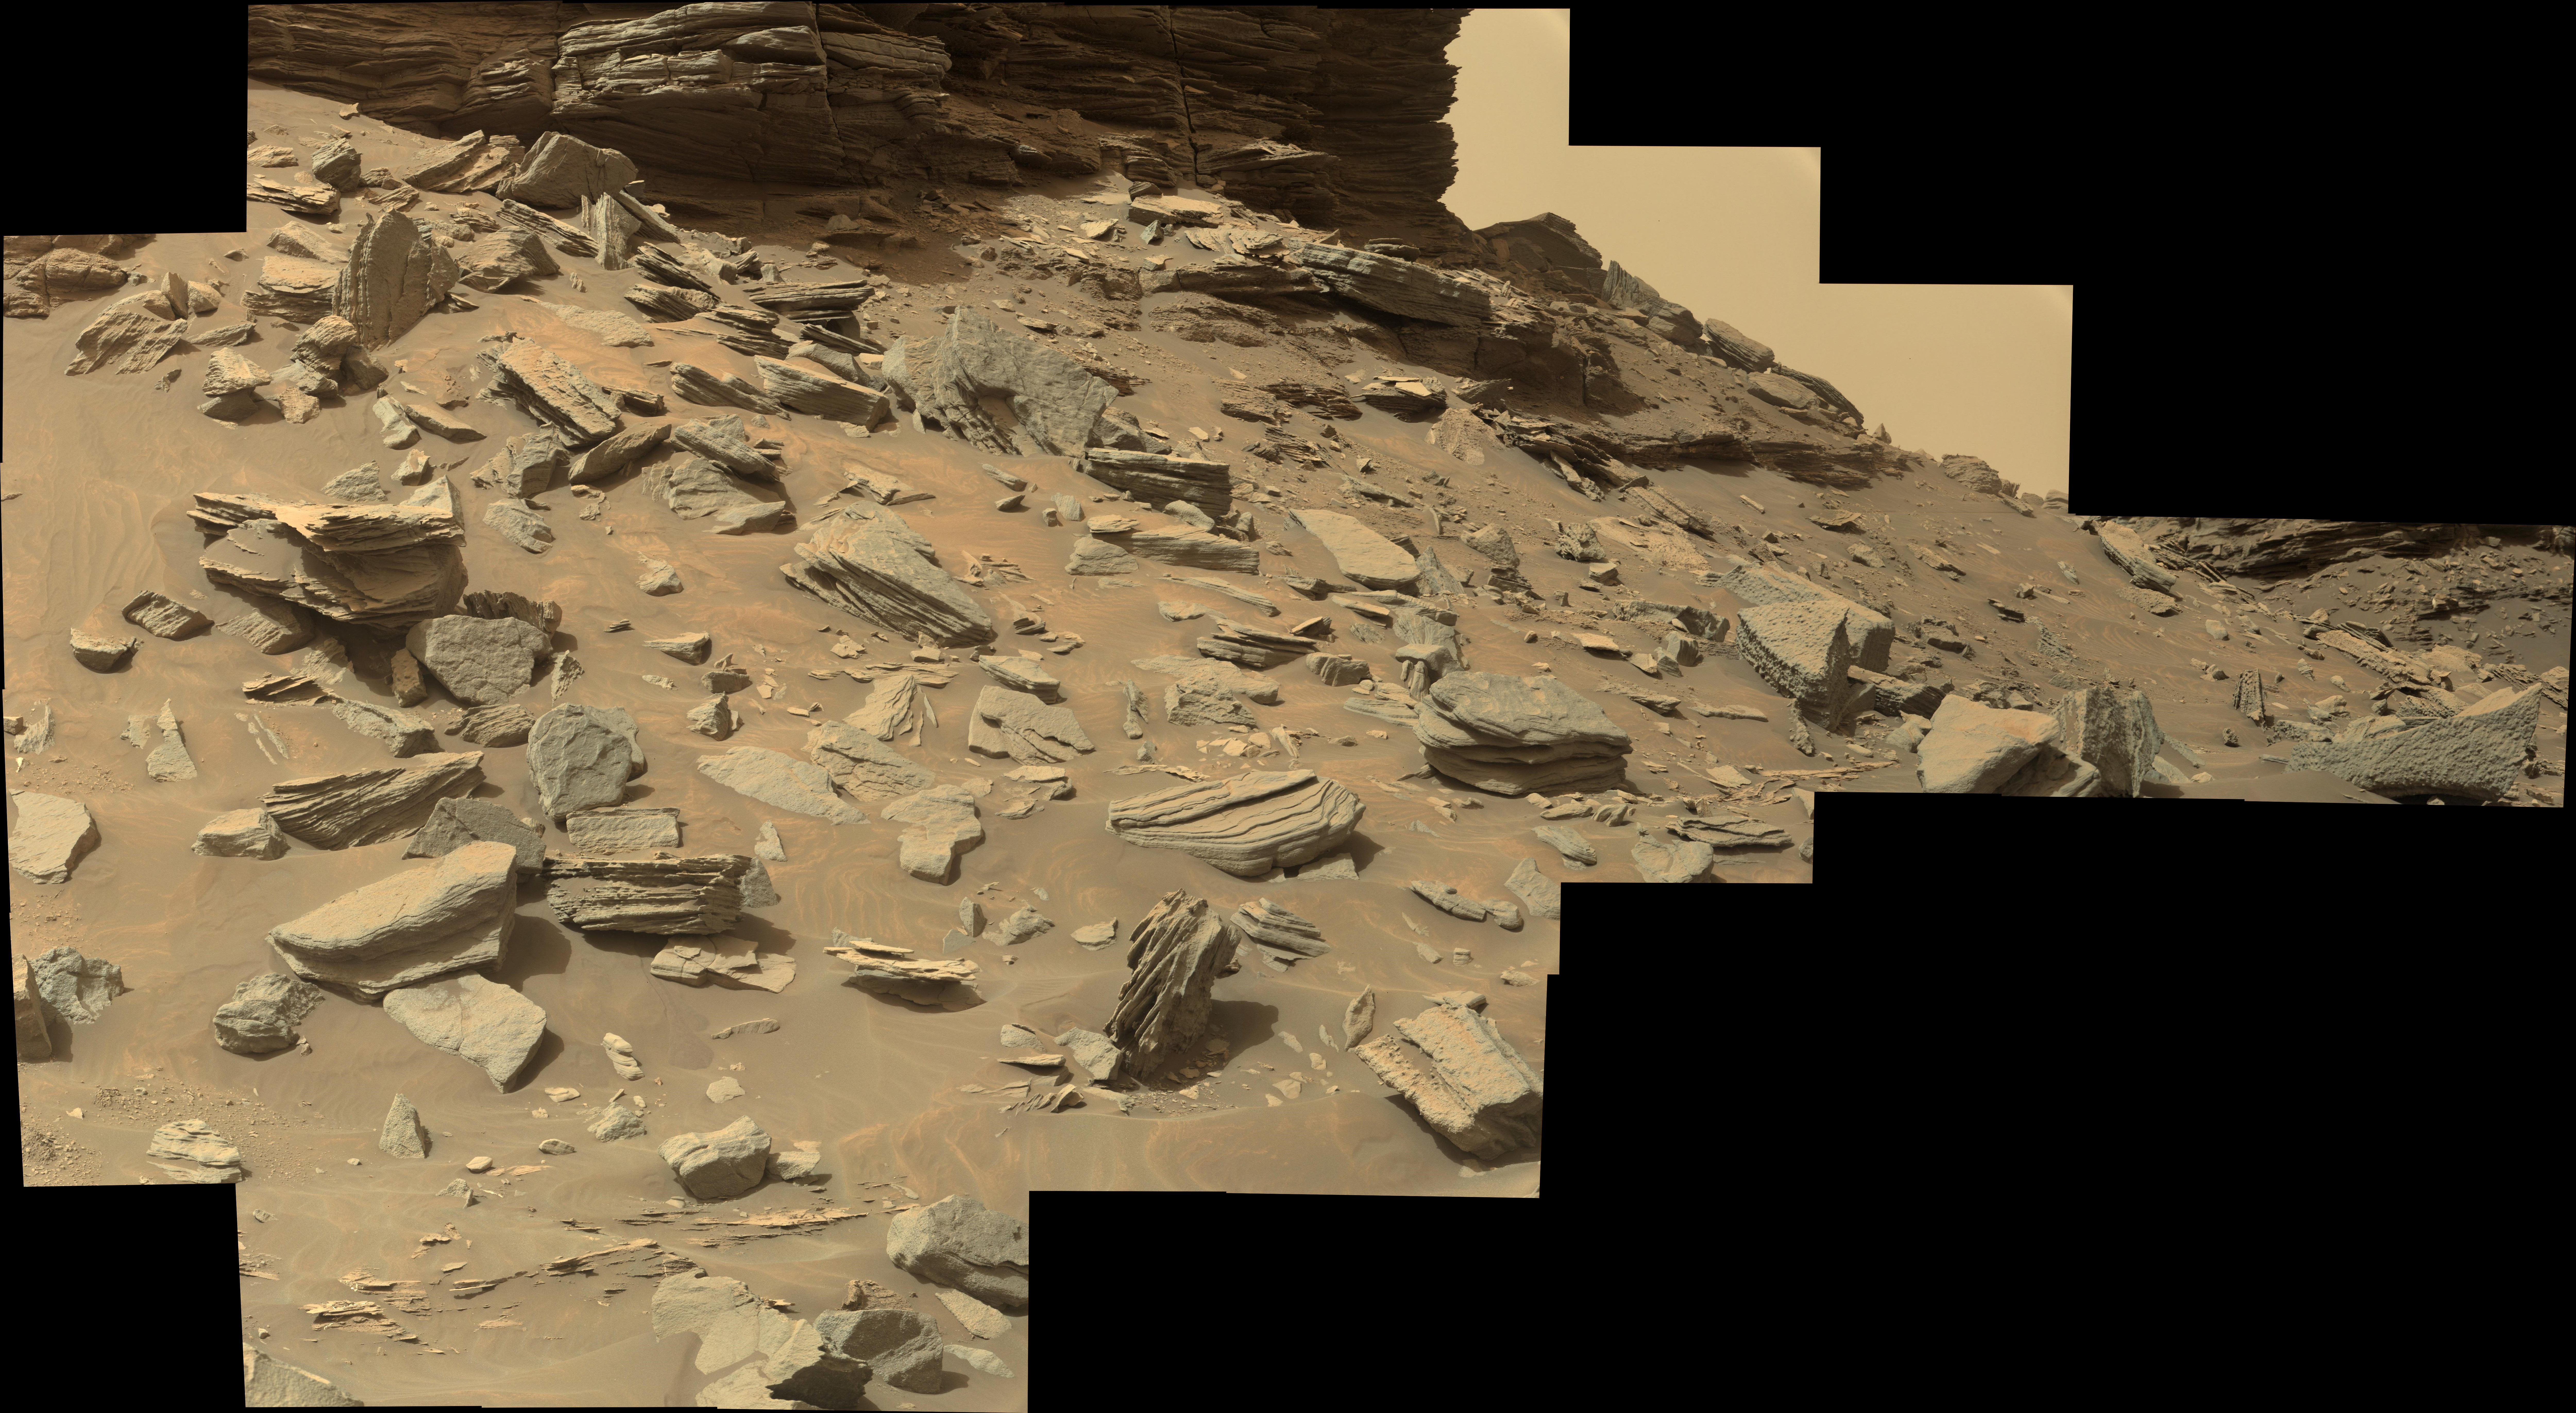 panoramic-curiosity-rover-view-1-sol-1467-was-life-on-mars